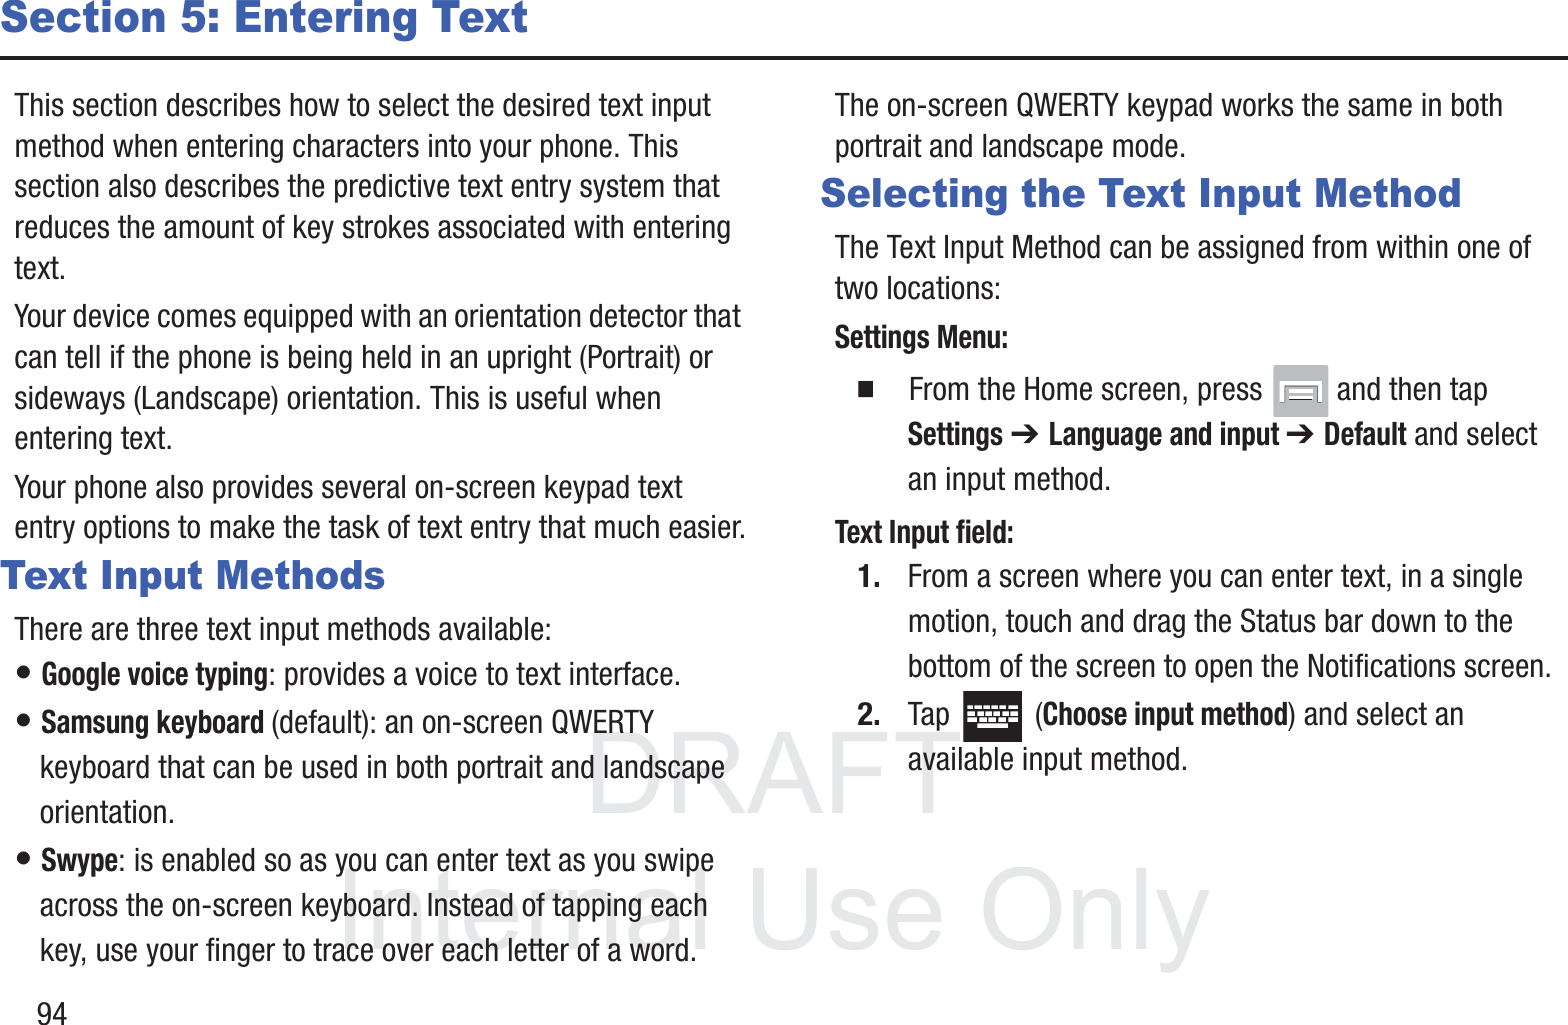 DRAFT InternalUse Only94Section 5: Entering TextThis section describes how to select the desired text input method when entering characters into your phone. This section also describes the predictive text entry system that reduces the amount of key strokes associated with entering text.Your device comes equipped with an orientation detector that can tell if the phone is being held in an upright (Portrait) or sideways (Landscape) orientation. This is useful when entering text.Your phone also provides several on-screen keypad text entry options to make the task of text entry that much easier.Text Input MethodsThere are three text input methods available:• Google voice typing: provides a voice to text interface.• Samsung keyboard (default): an on-screen QWERTY keyboard that can be used in both portrait and landscape orientation.• Swype: is enabled so as you can enter text as you swipe across the on-screen keyboard. Instead of tapping each key, use your finger to trace over each letter of a word.The on-screen QWERTY keypad works the same in both portrait and landscape mode.Selecting the Text Input MethodThe Text Input Method can be assigned from within one of two locations:Settings Menu:䡲  From the Home screen, press   and then tap Settings ➔ Language and input ➔ Default and select an input method.Text Input field:1. From a screen where you can enter text, in a single motion, touch and drag the Status bar down to the bottom of the screen to open the Notifications screen.2. Tap  (Choose input method) and select an available input method.  